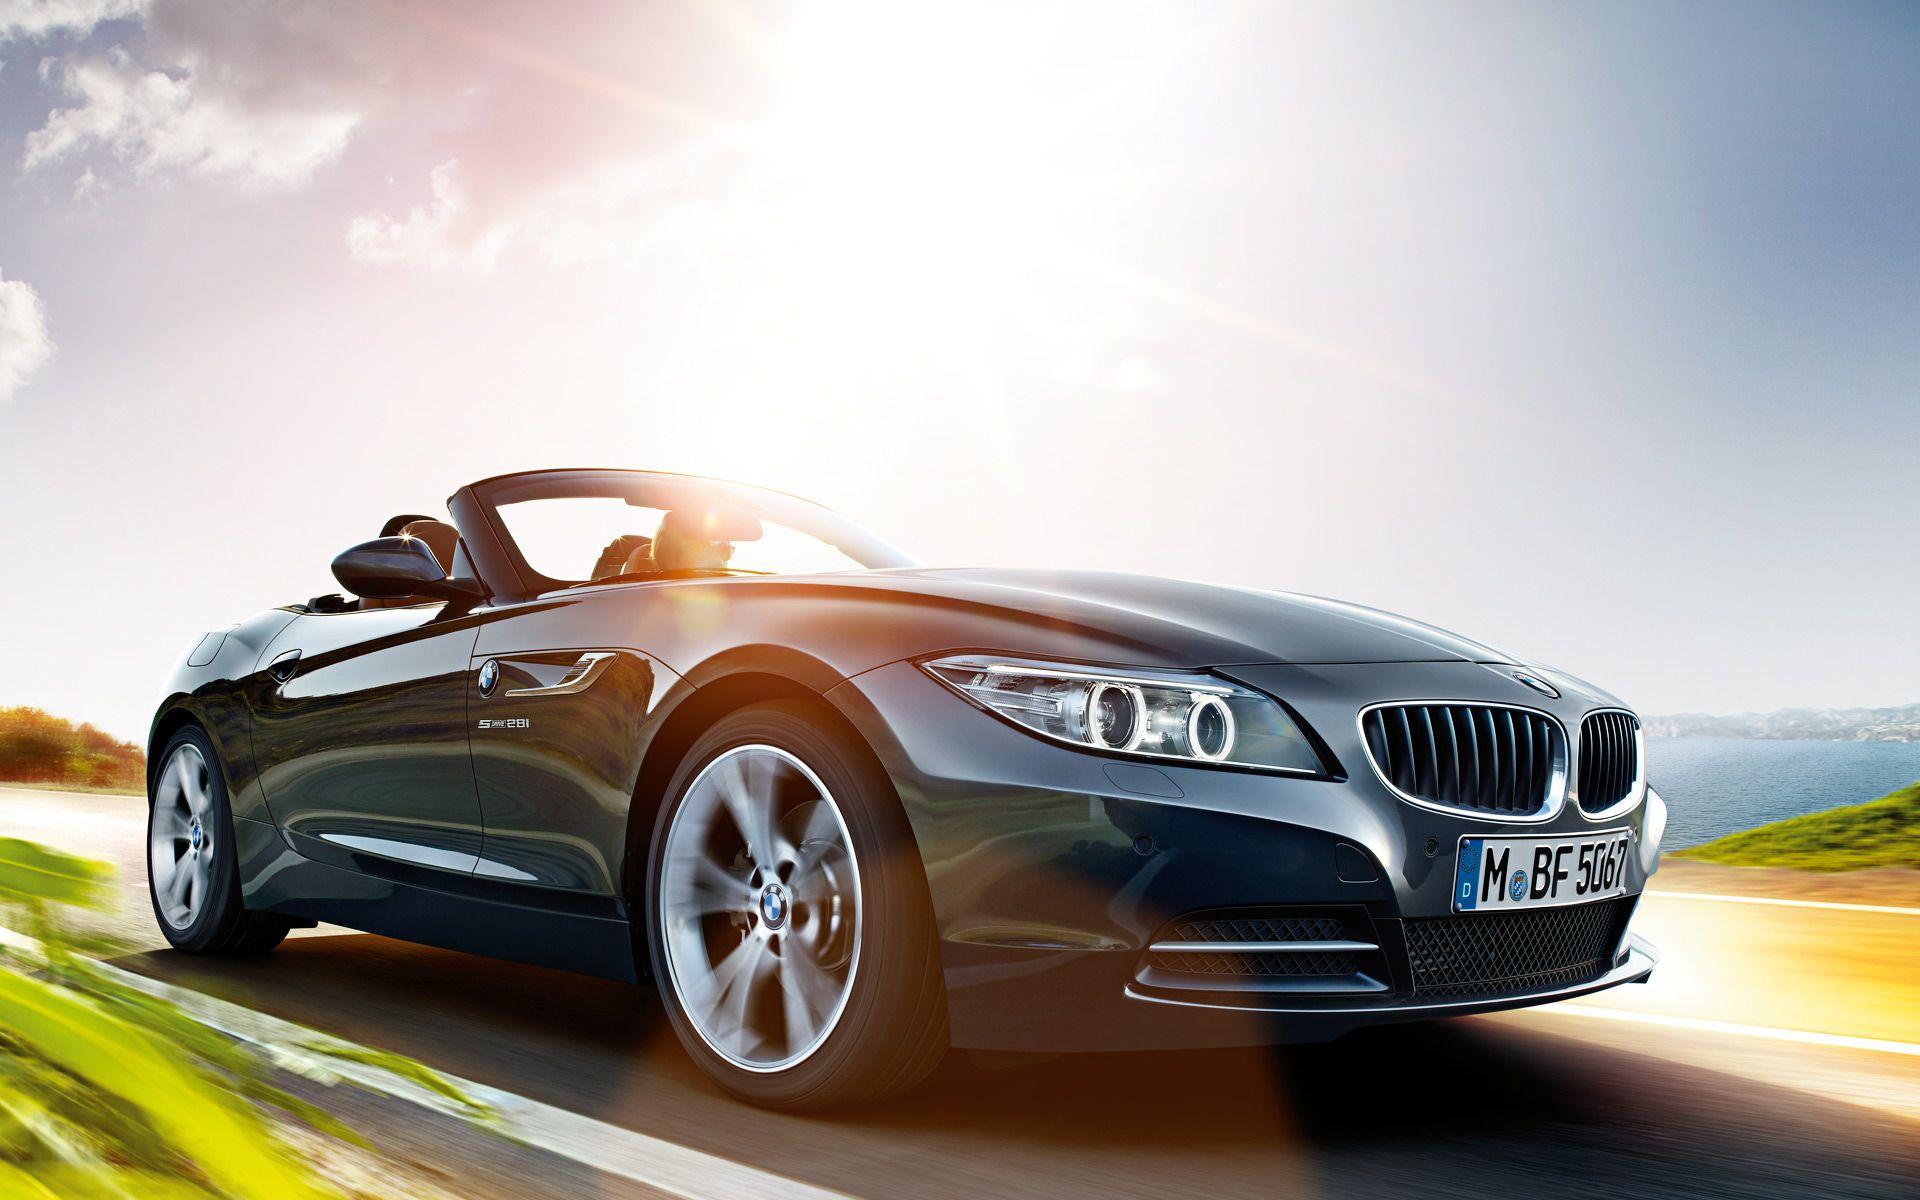 BMW Z4 on road exterior wallpaper and photo Cars